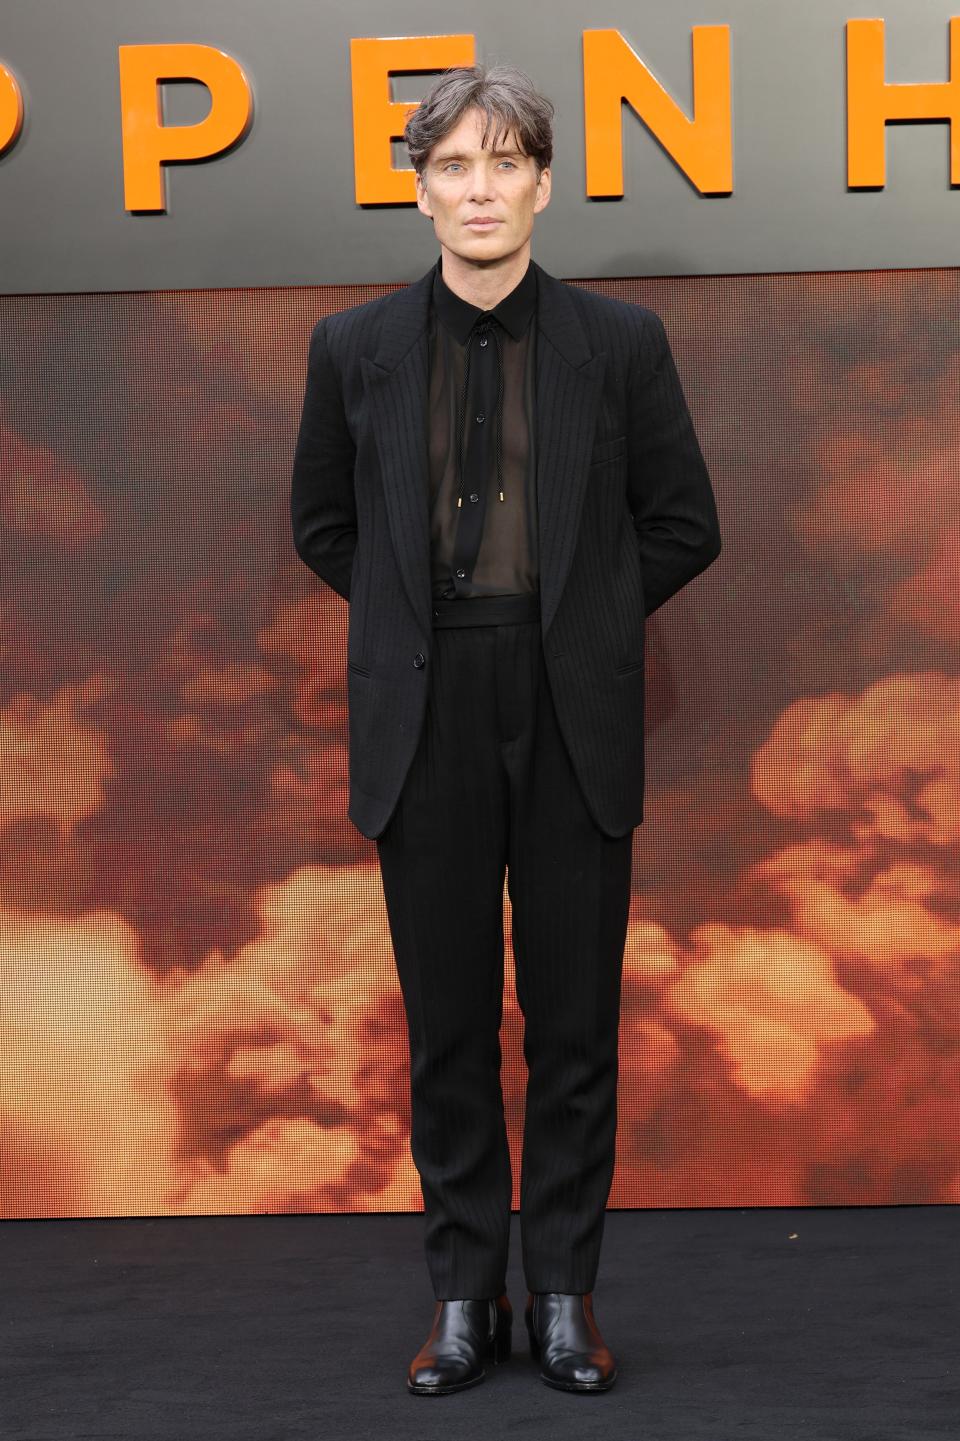 Cillian Murphy at the London premiere of Oppenheimer in July.